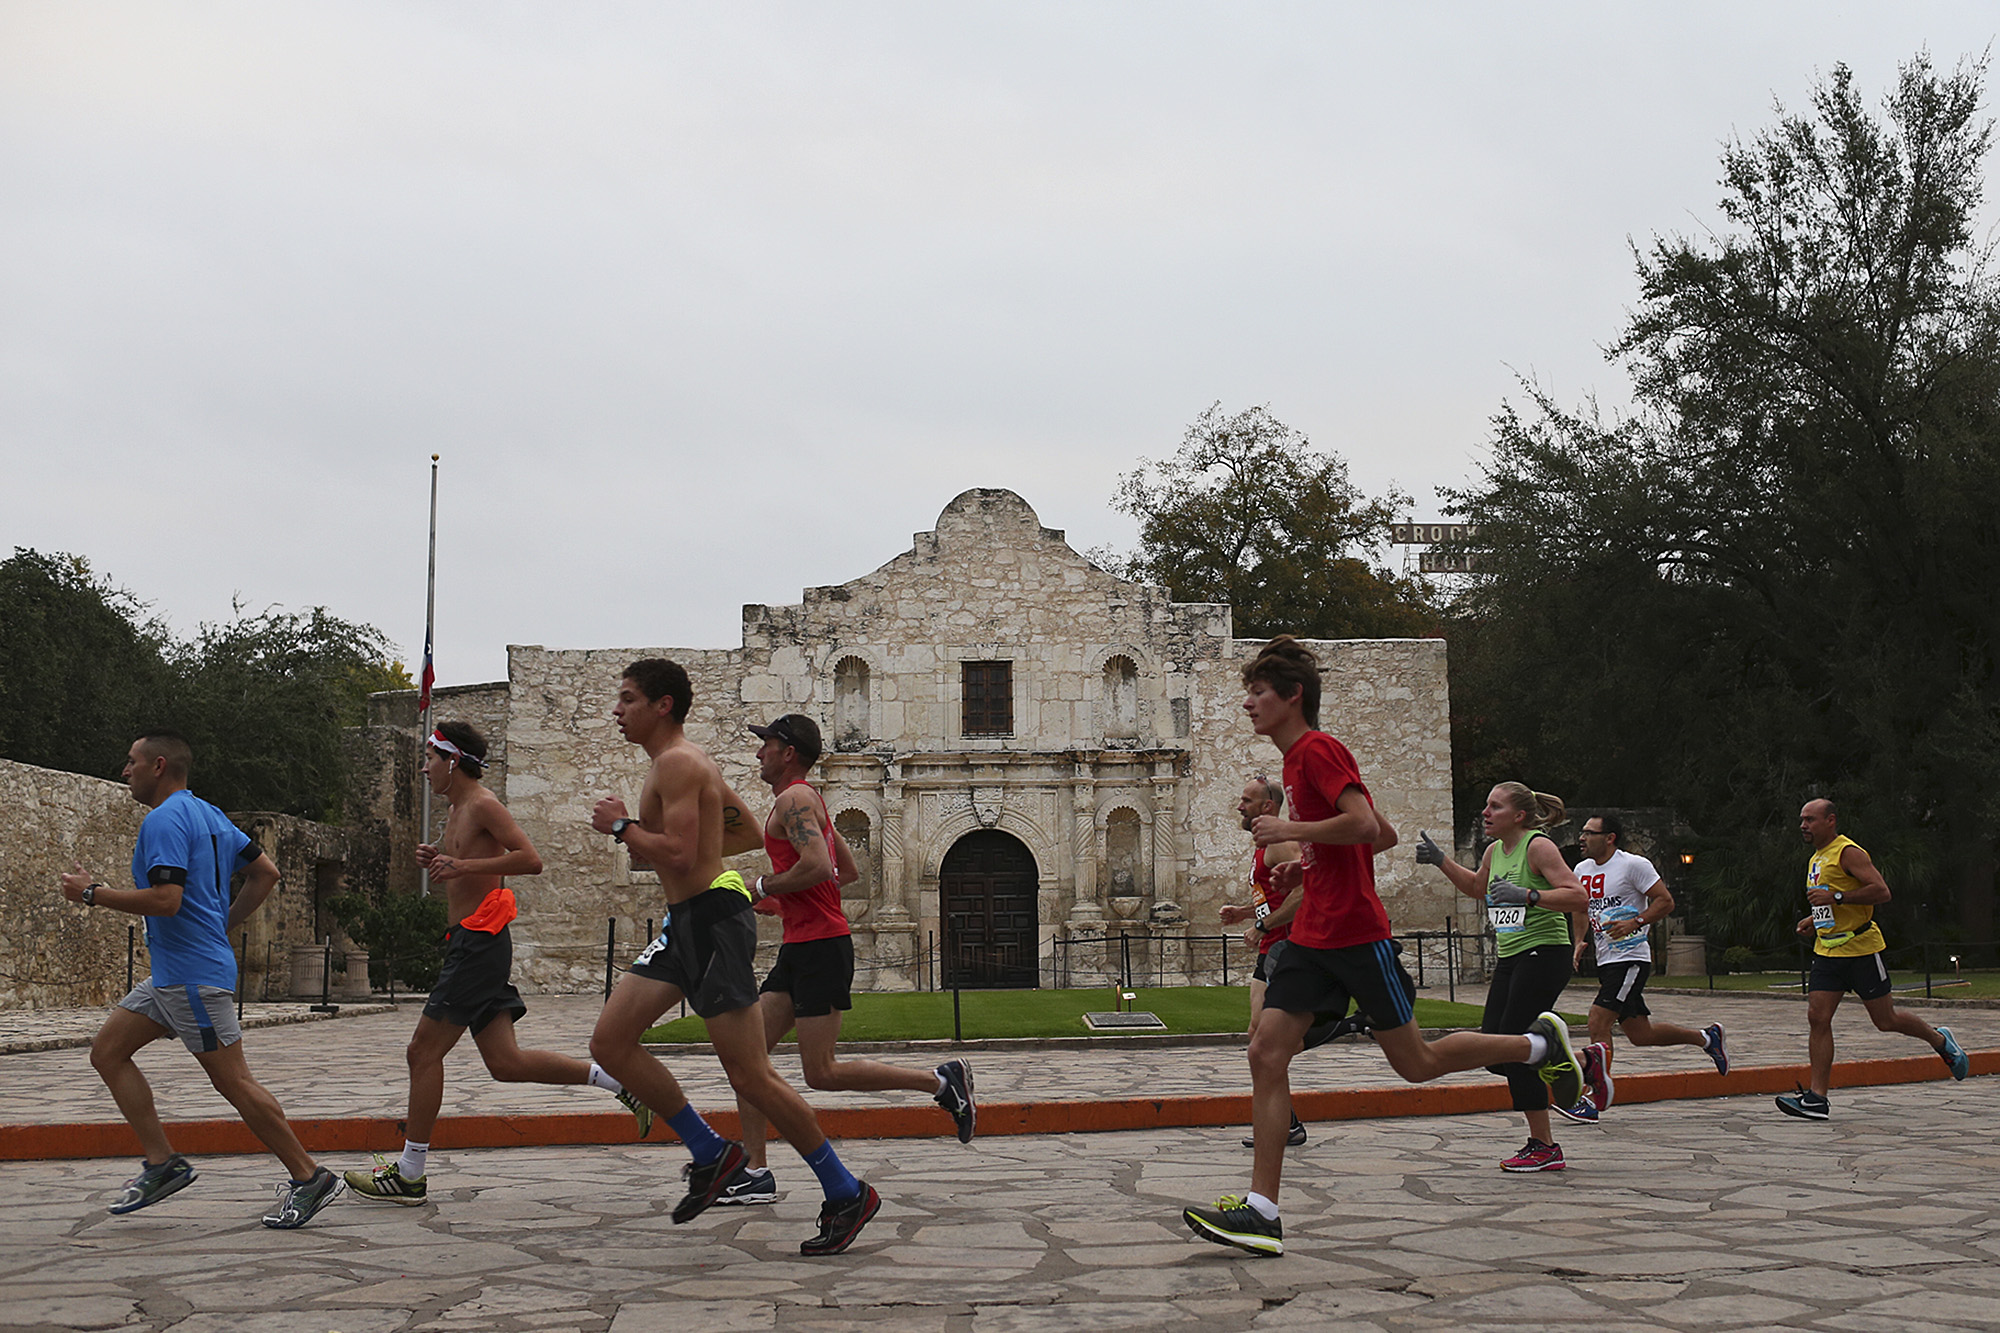 Three Texas running races worth traveling for